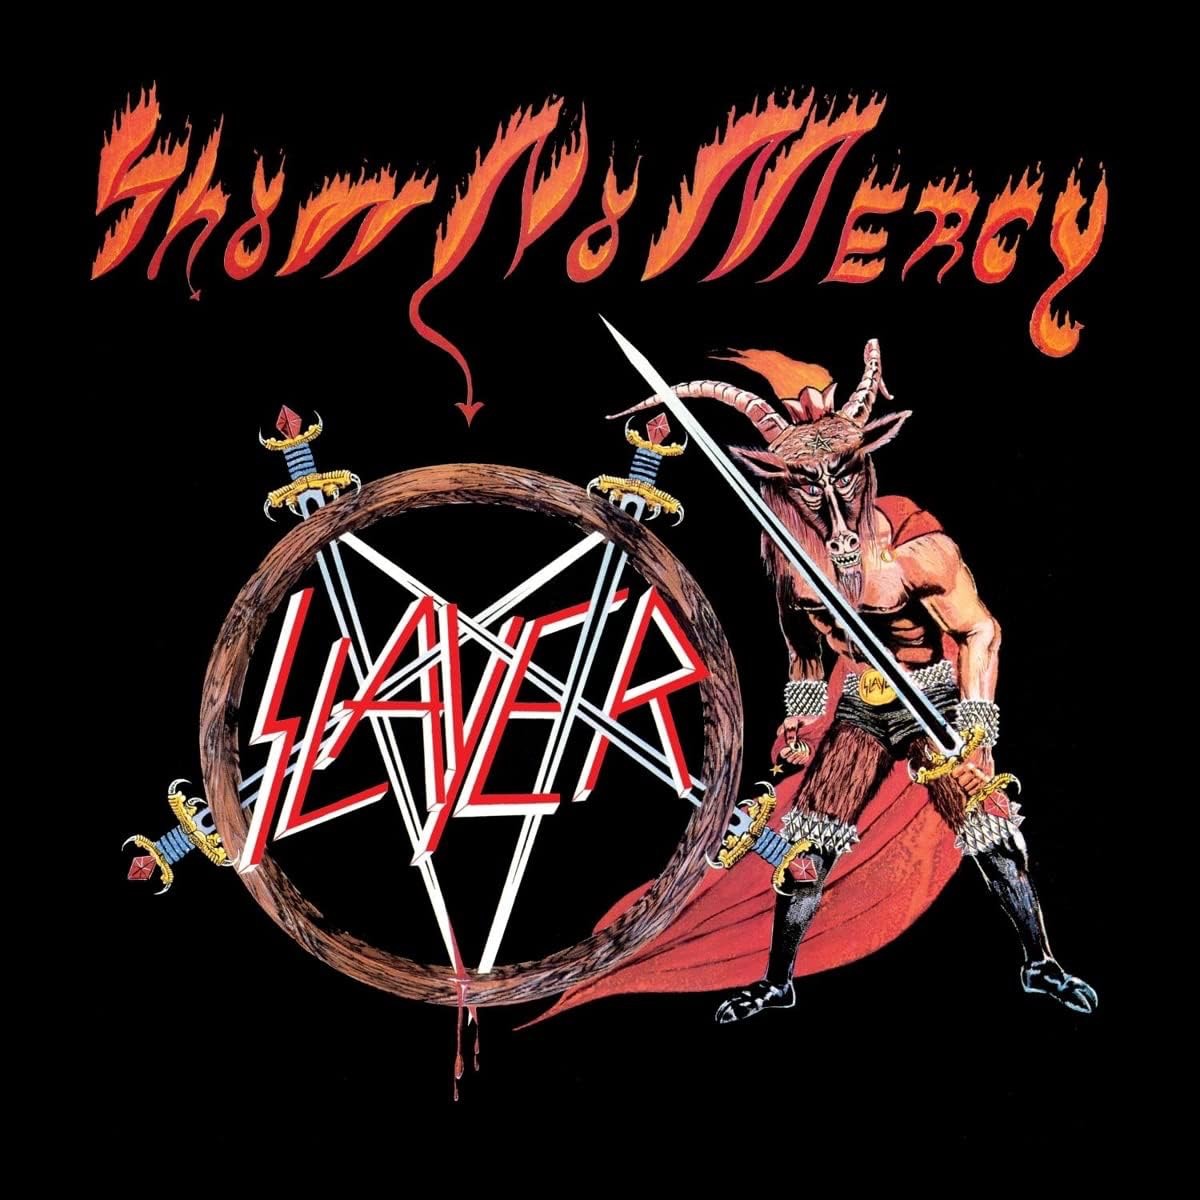 Slayer – Show No Mercy 40th Anniversary Edition Review